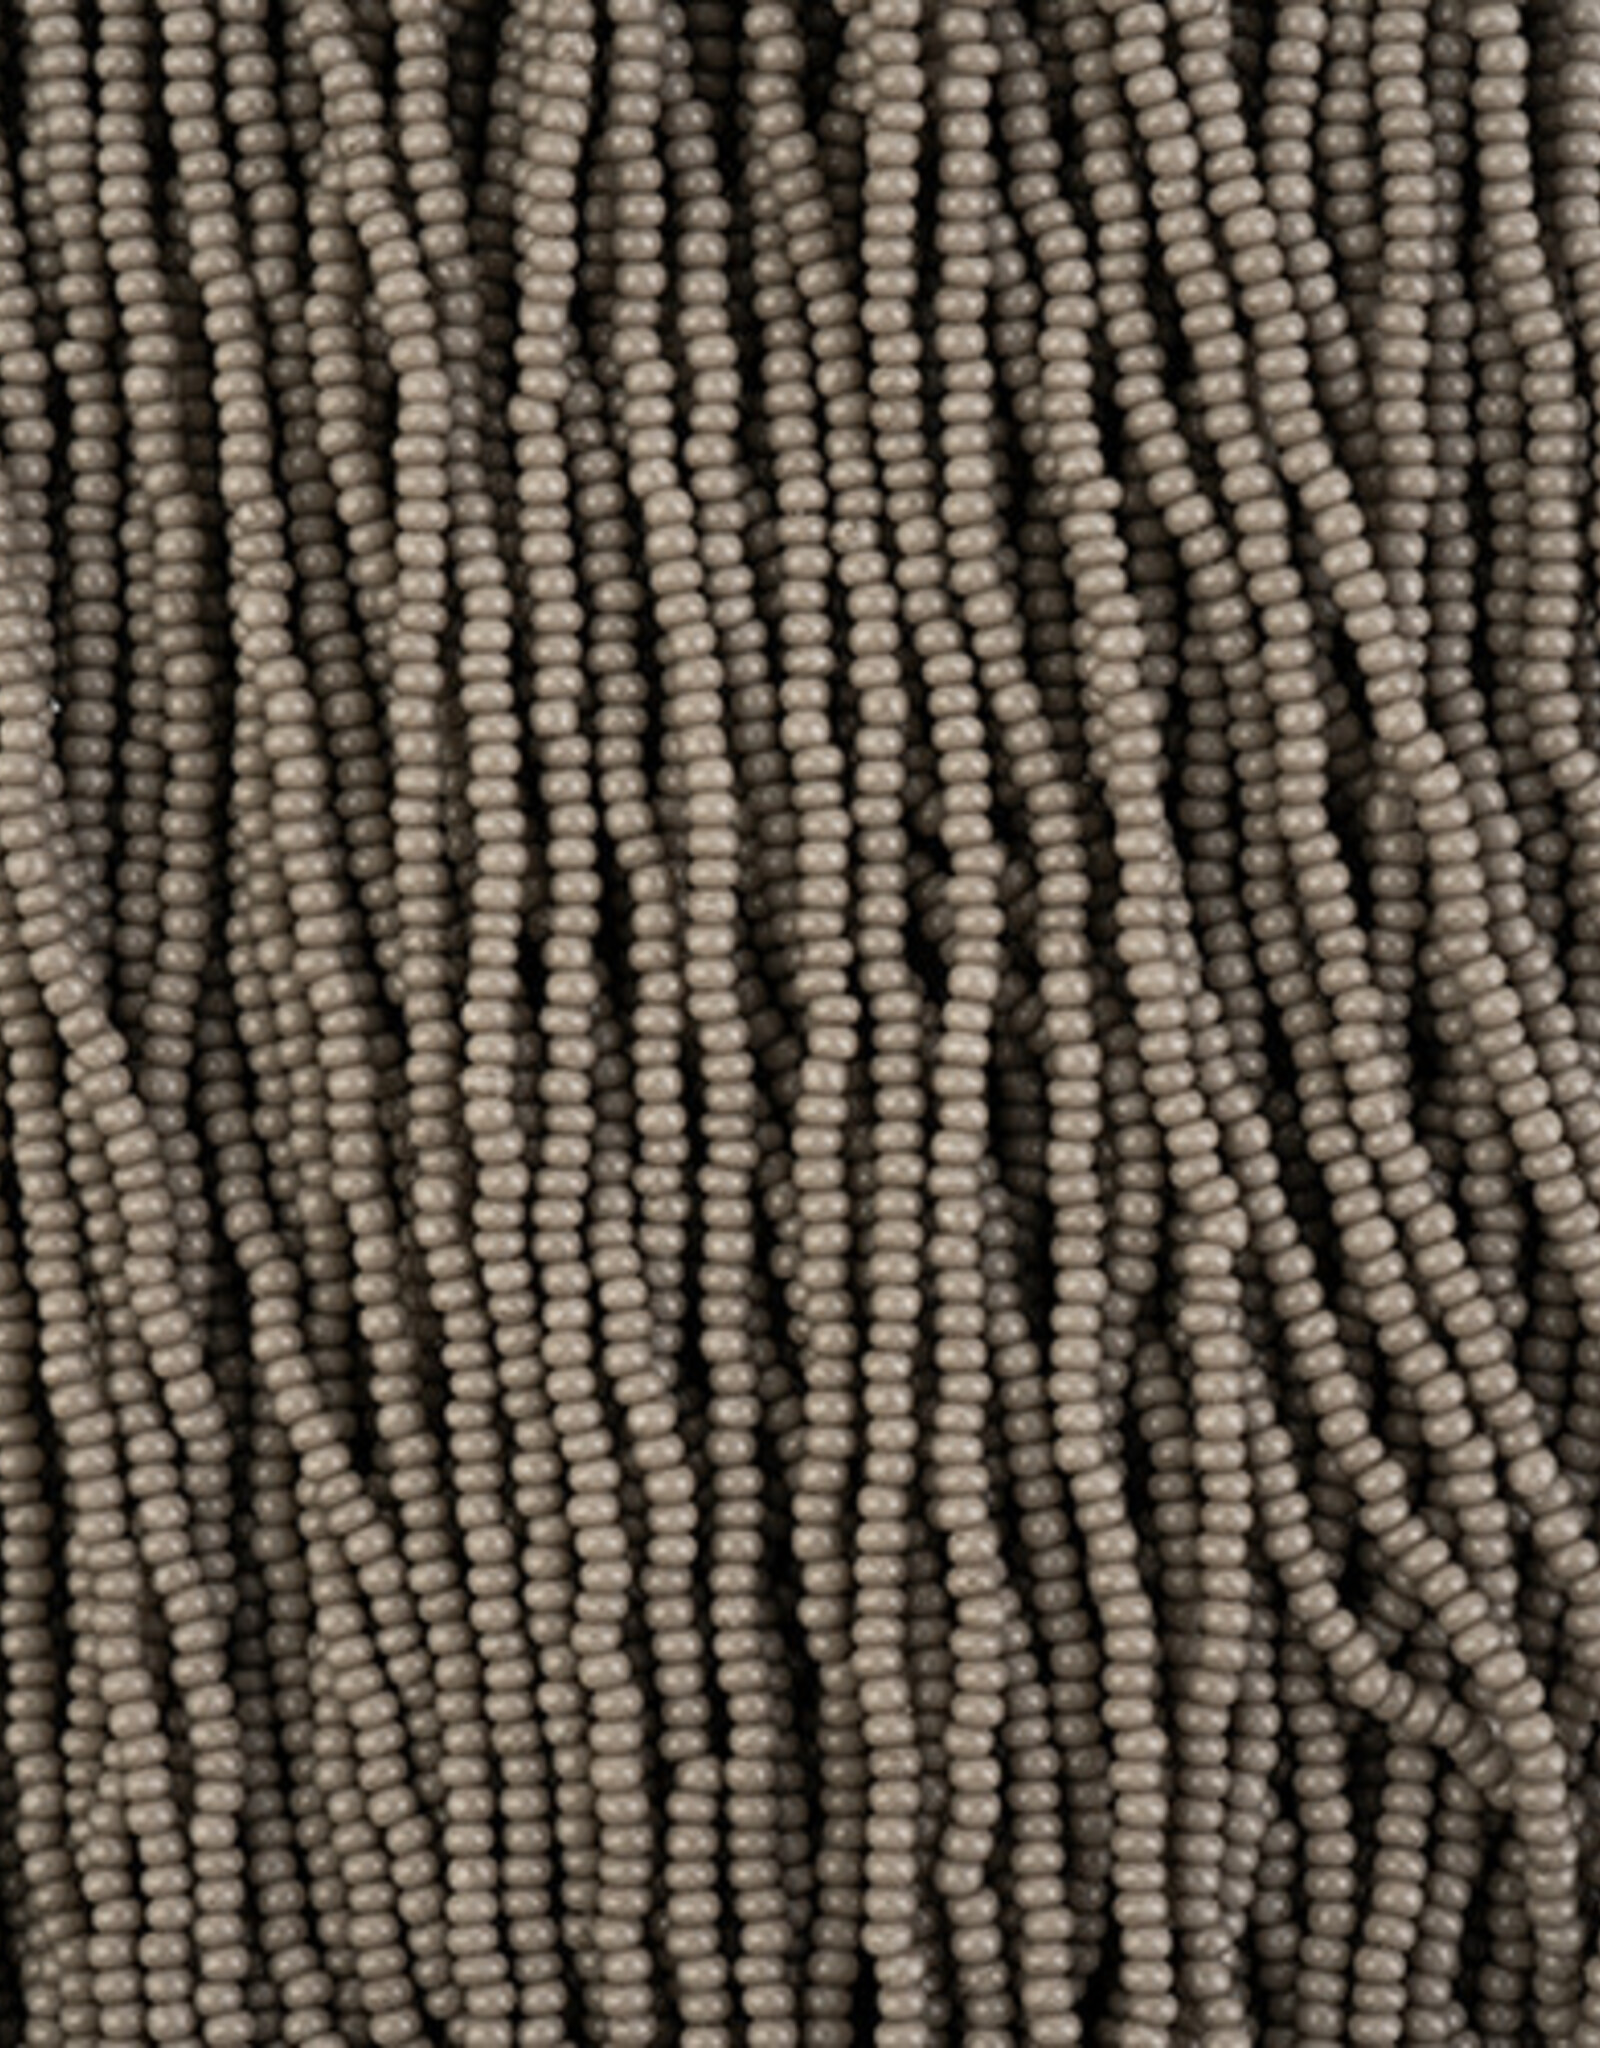 Seed Beads 11/0 Grey Chalk Dyed Solgel Strung 43255